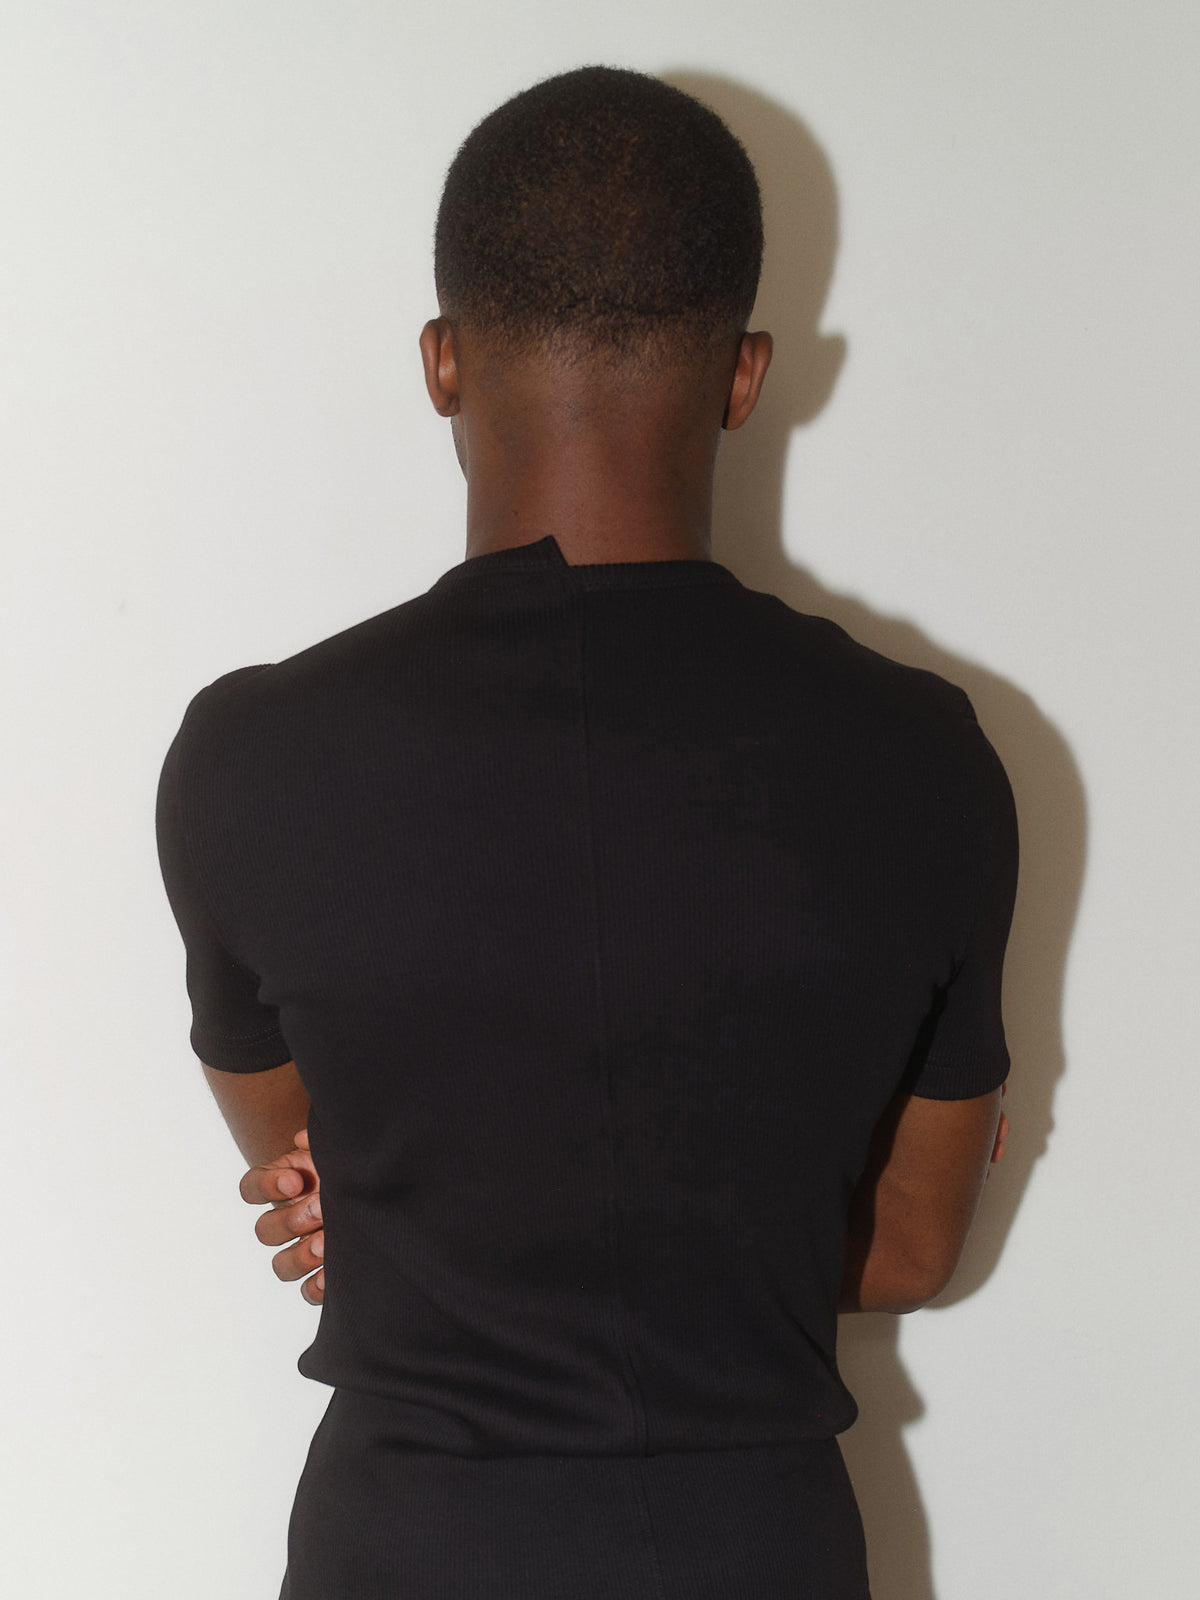 Ribbed Cotton T-shirt designed by Christina Seewald. Sustainable, designed and made in Europe